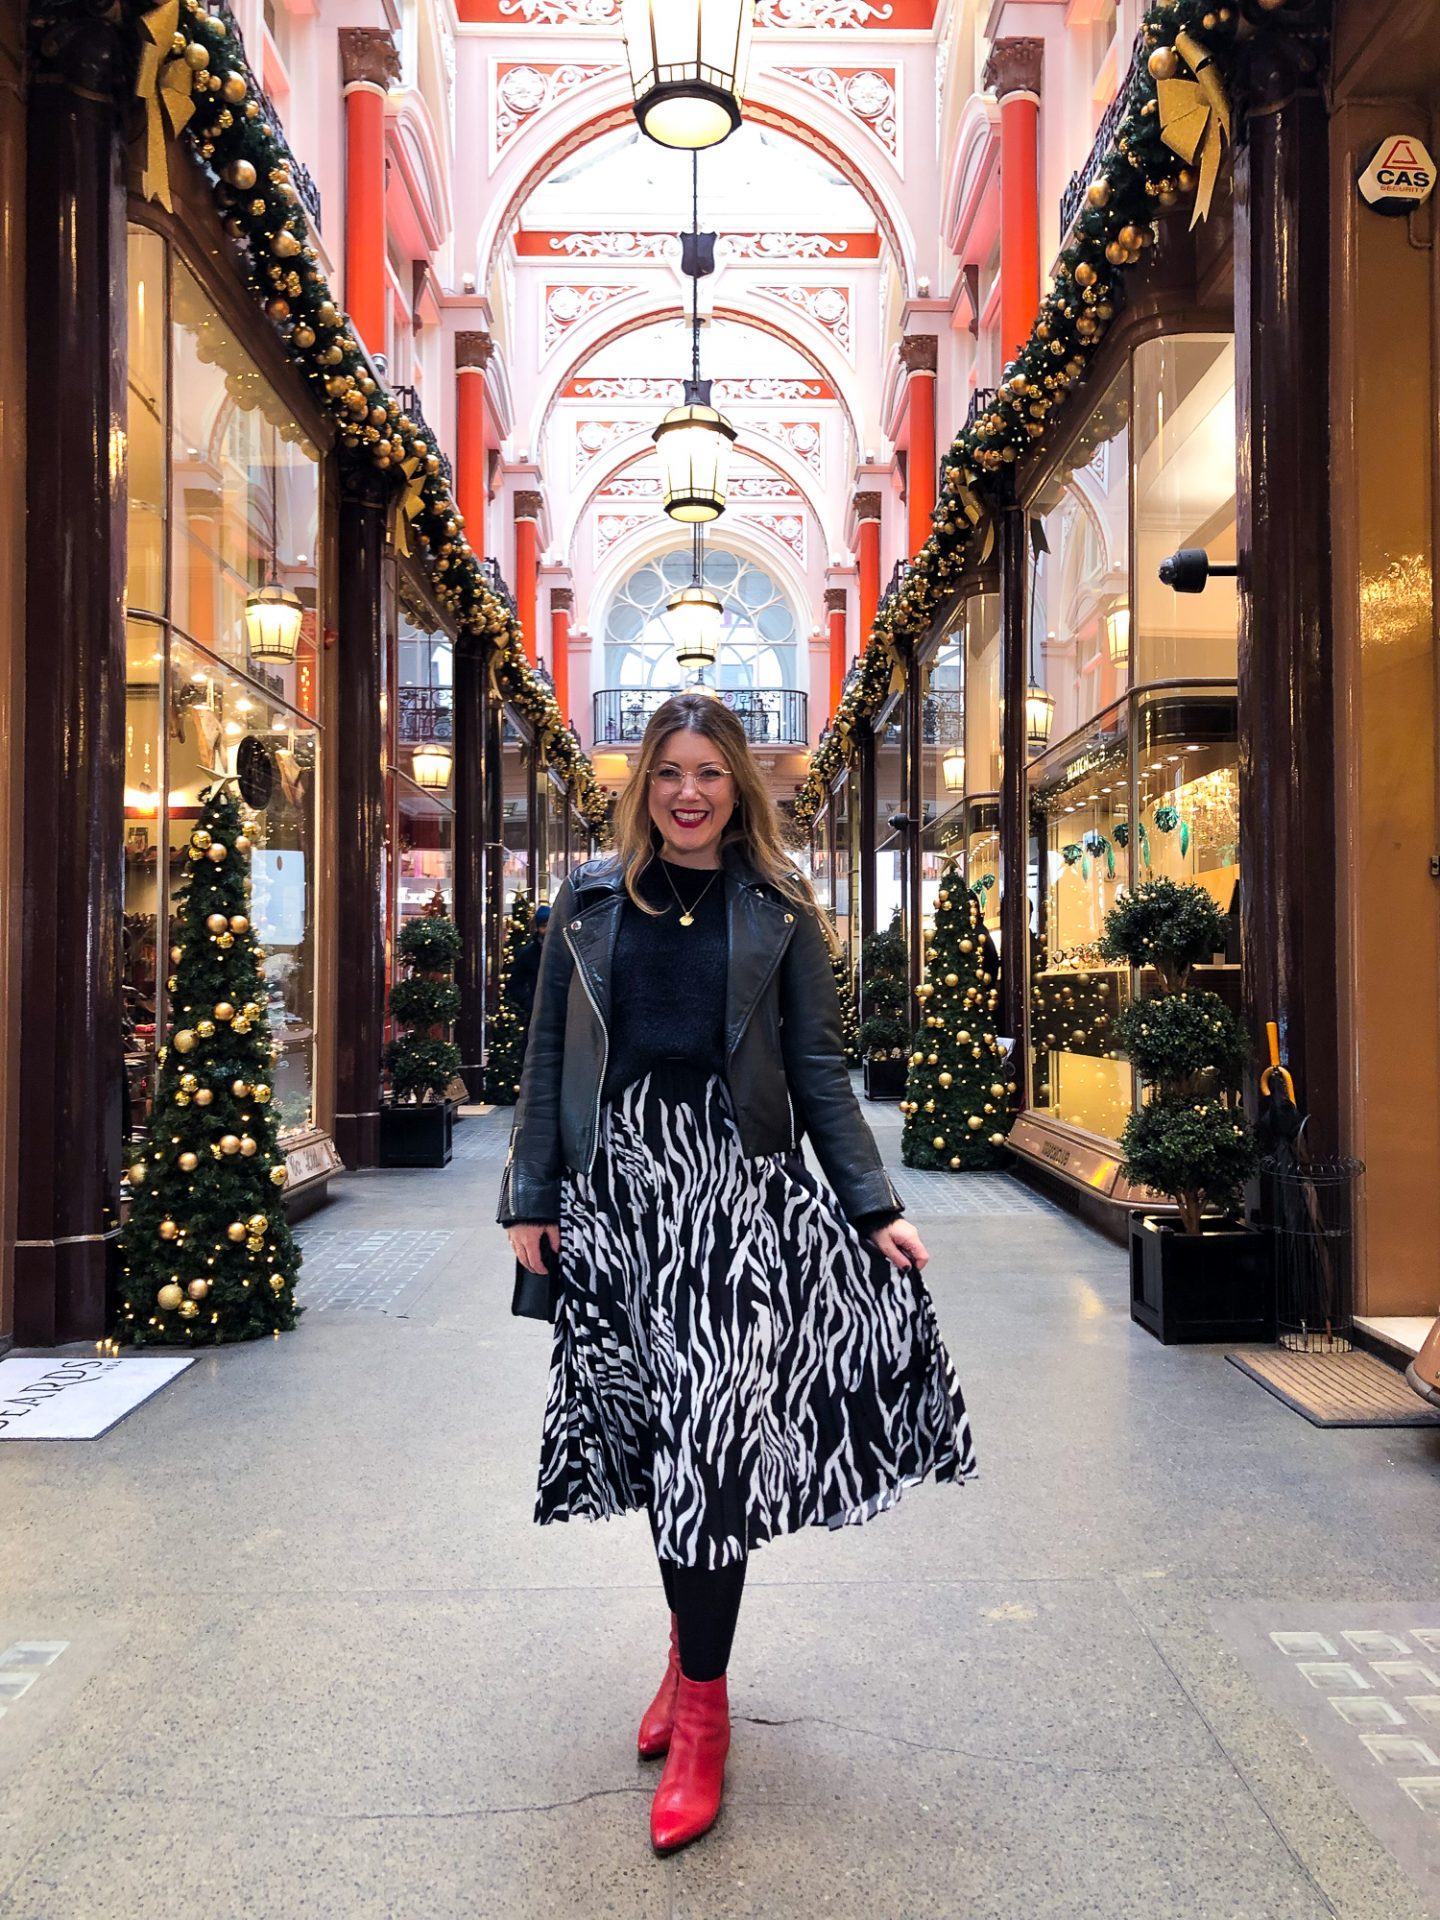 A festive outfit perfect for festive dinner parties or your outfit for Christmas day! Red boots and red lips always look great! Full outfit from Debenhams.